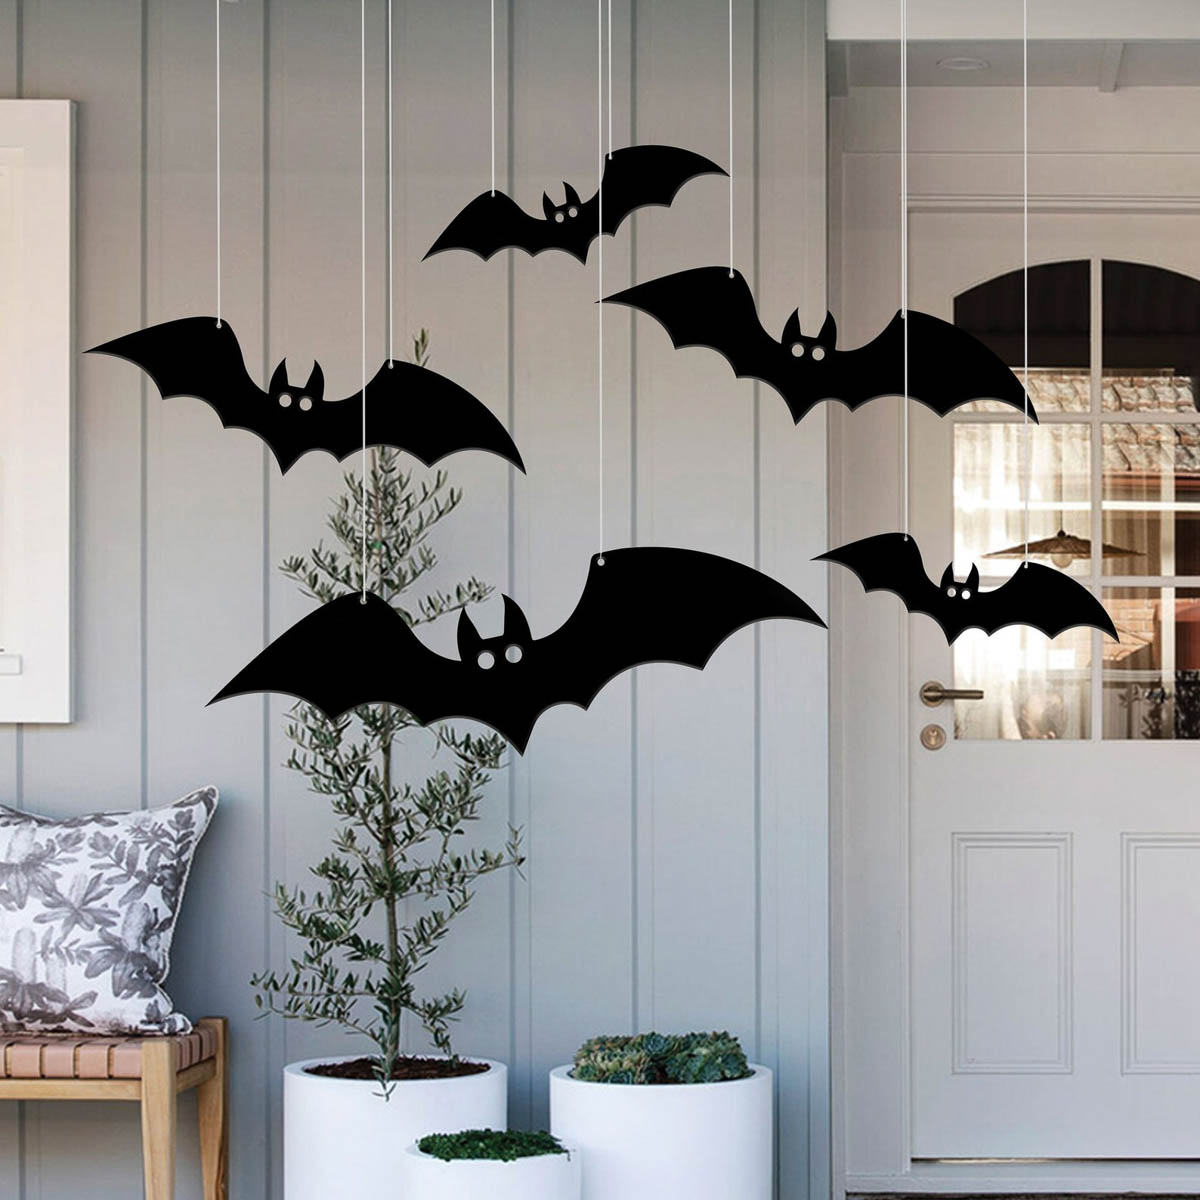 Hanging metal bats for front porch Halloween decor